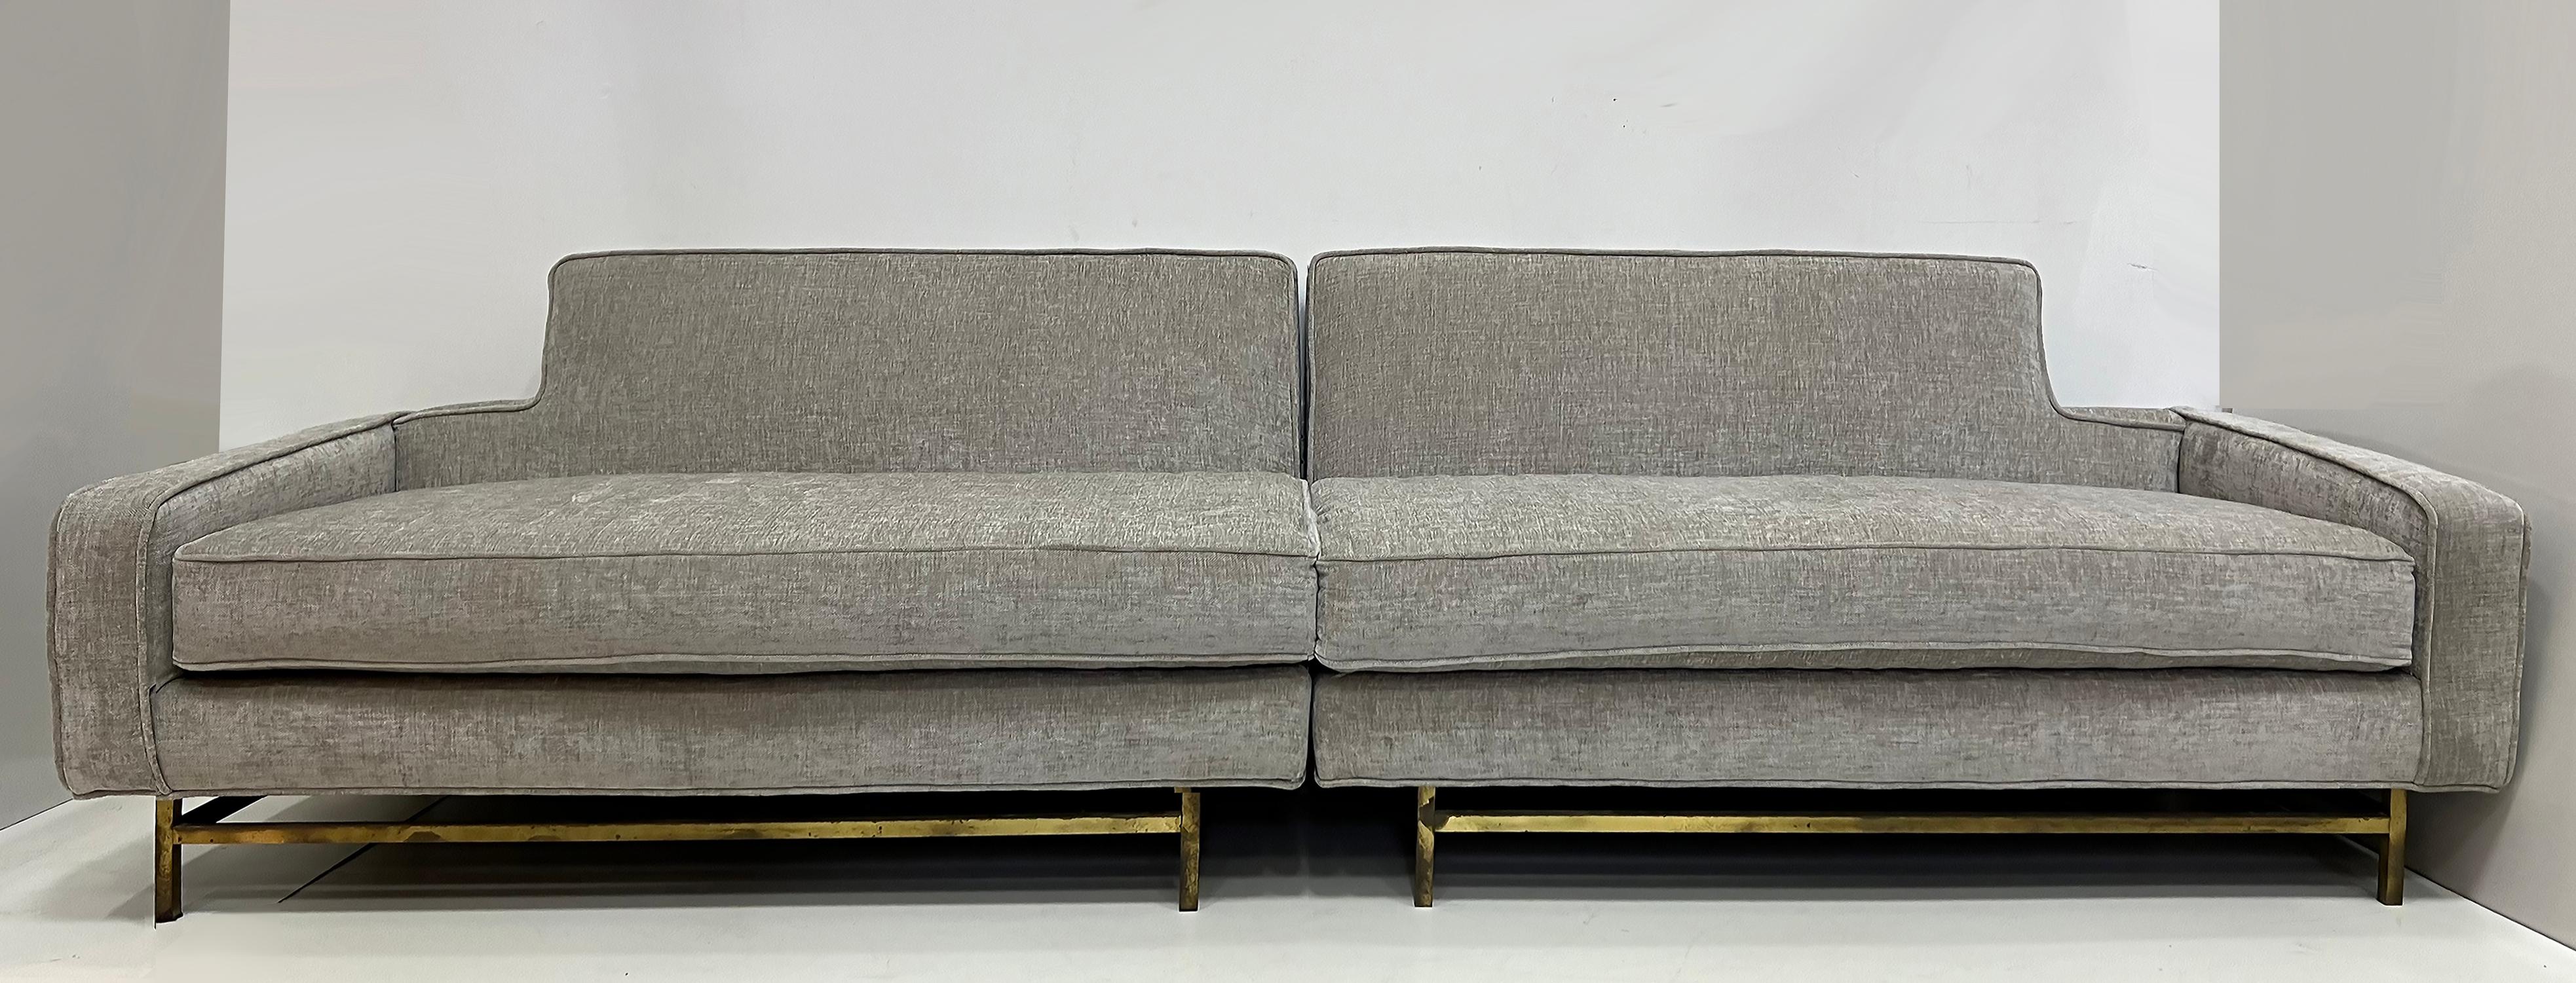  Harvey Probber Mid-century Modern Sofa Newly Upholstered, Brass Stretcher In Good Condition For Sale In Miami, FL